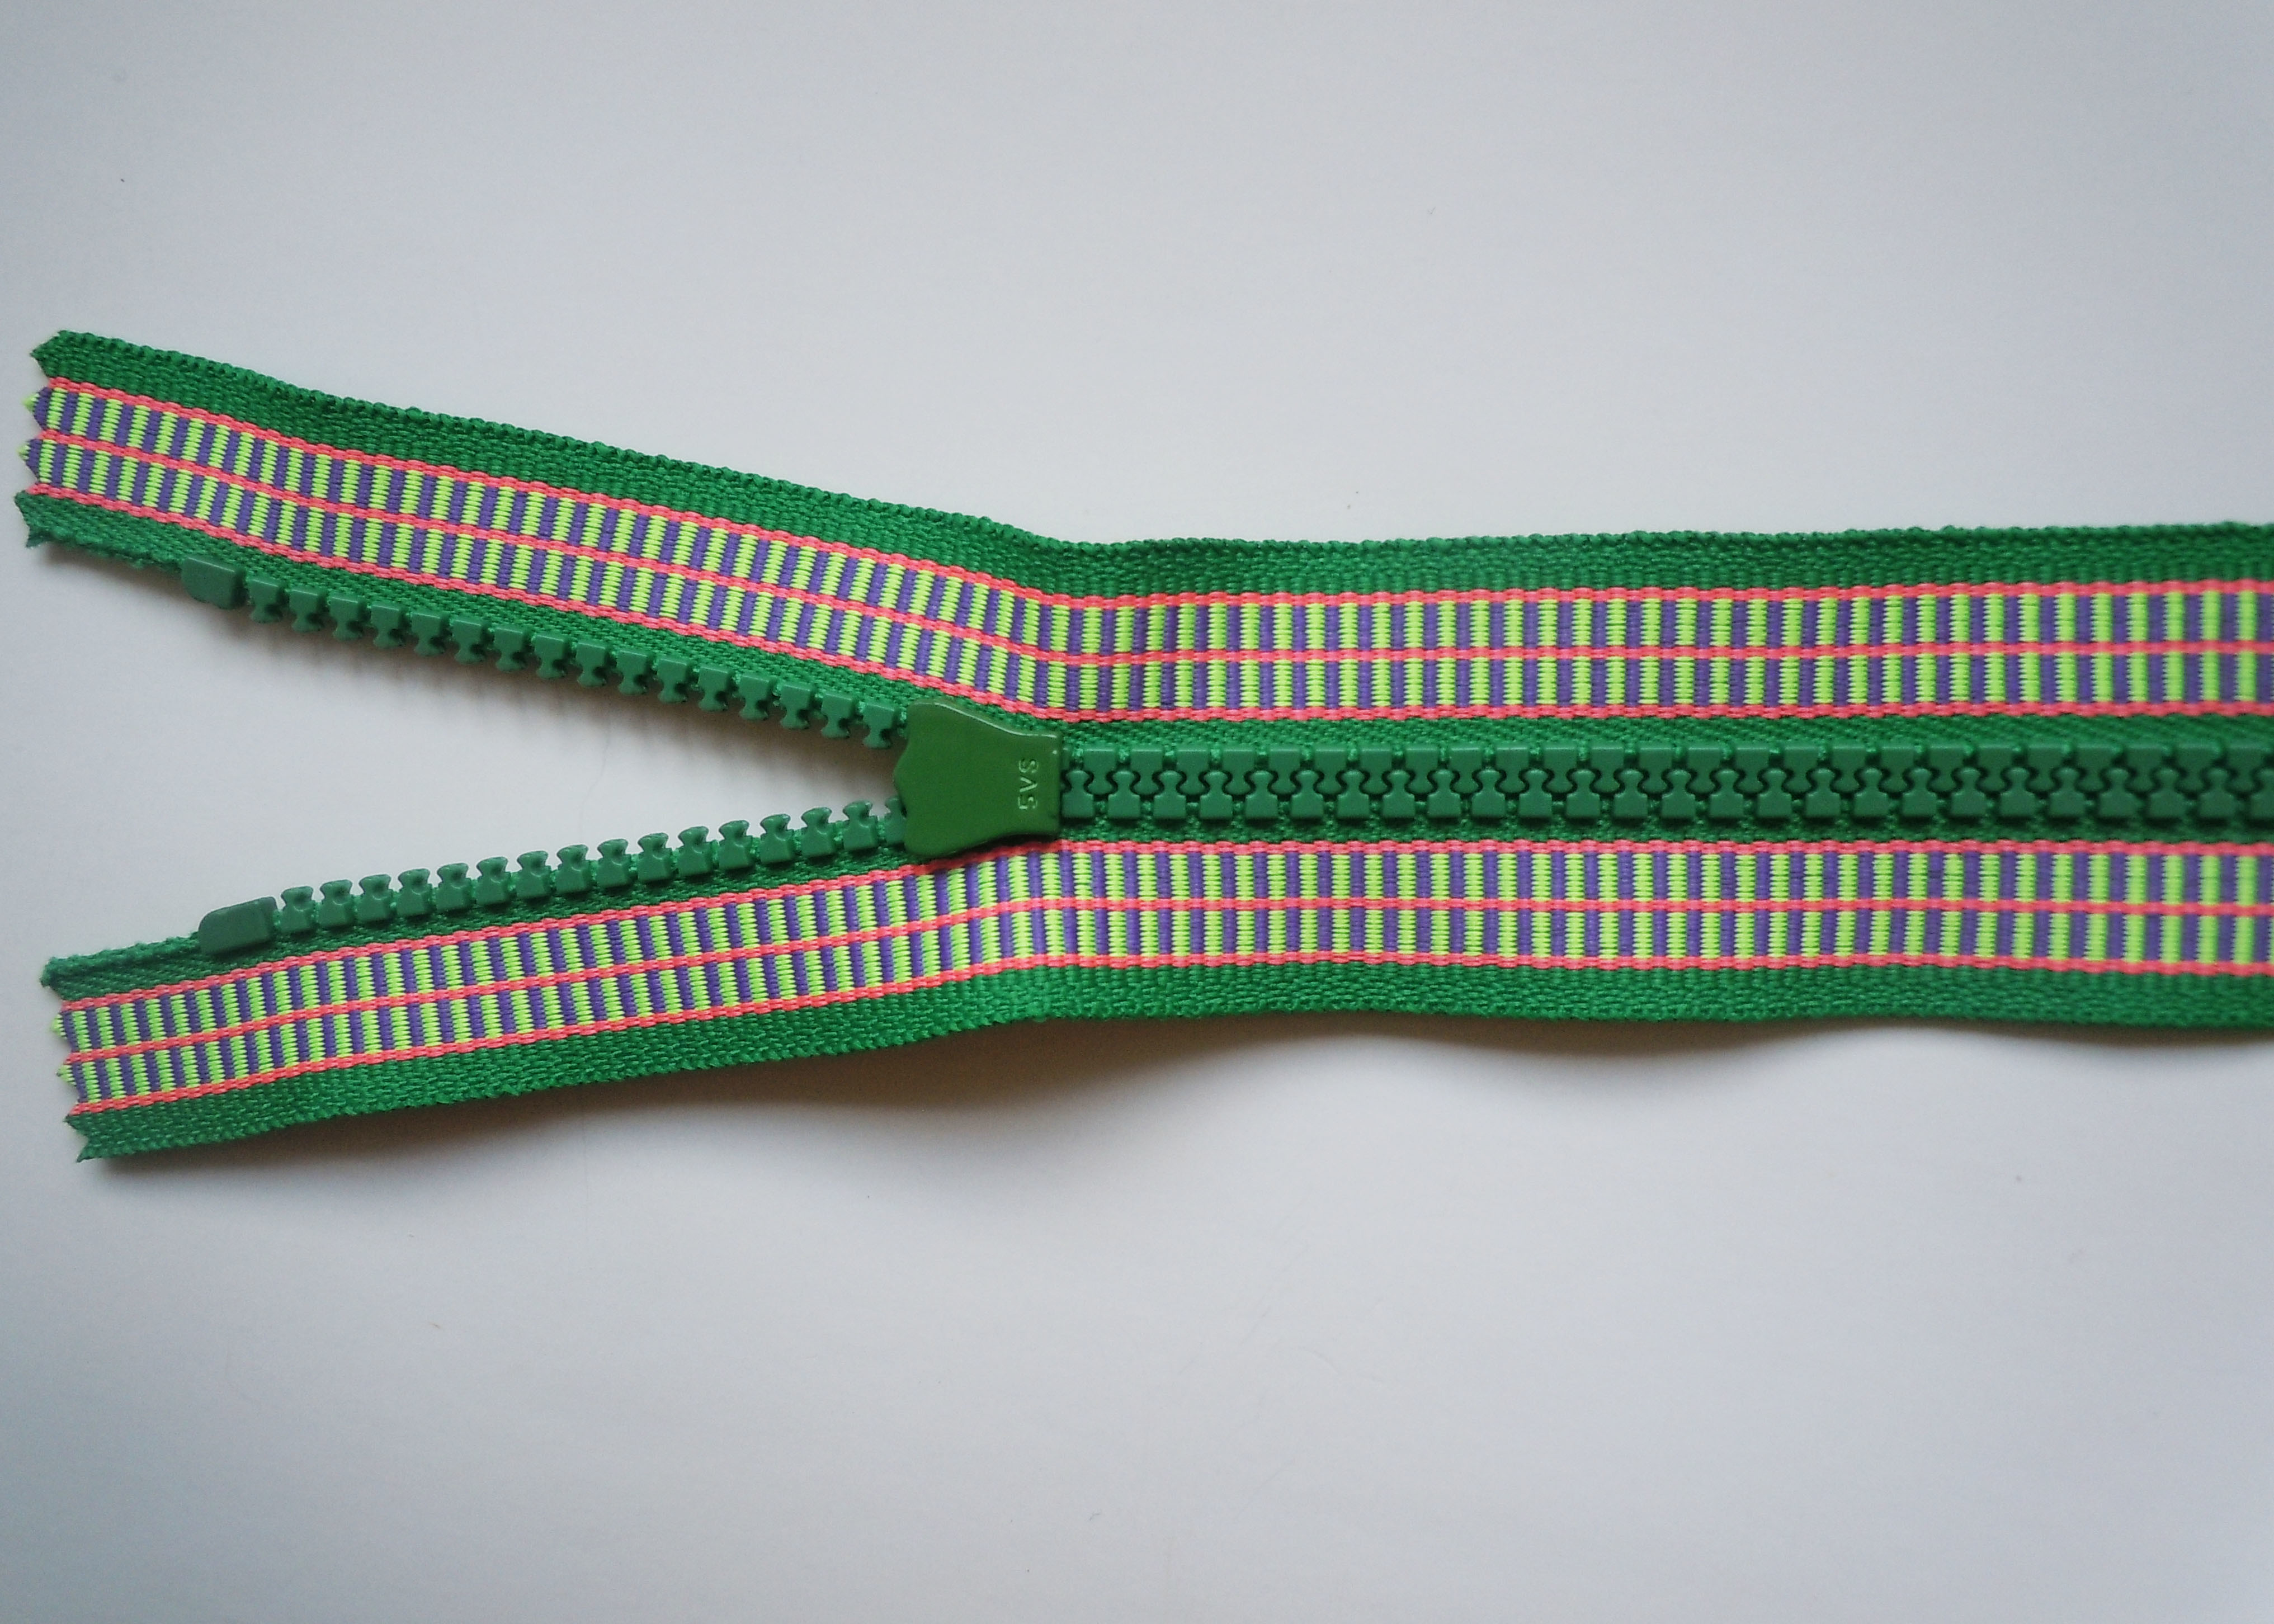  Garment accessory decorative metal separating zippers for hand bags Manufactures